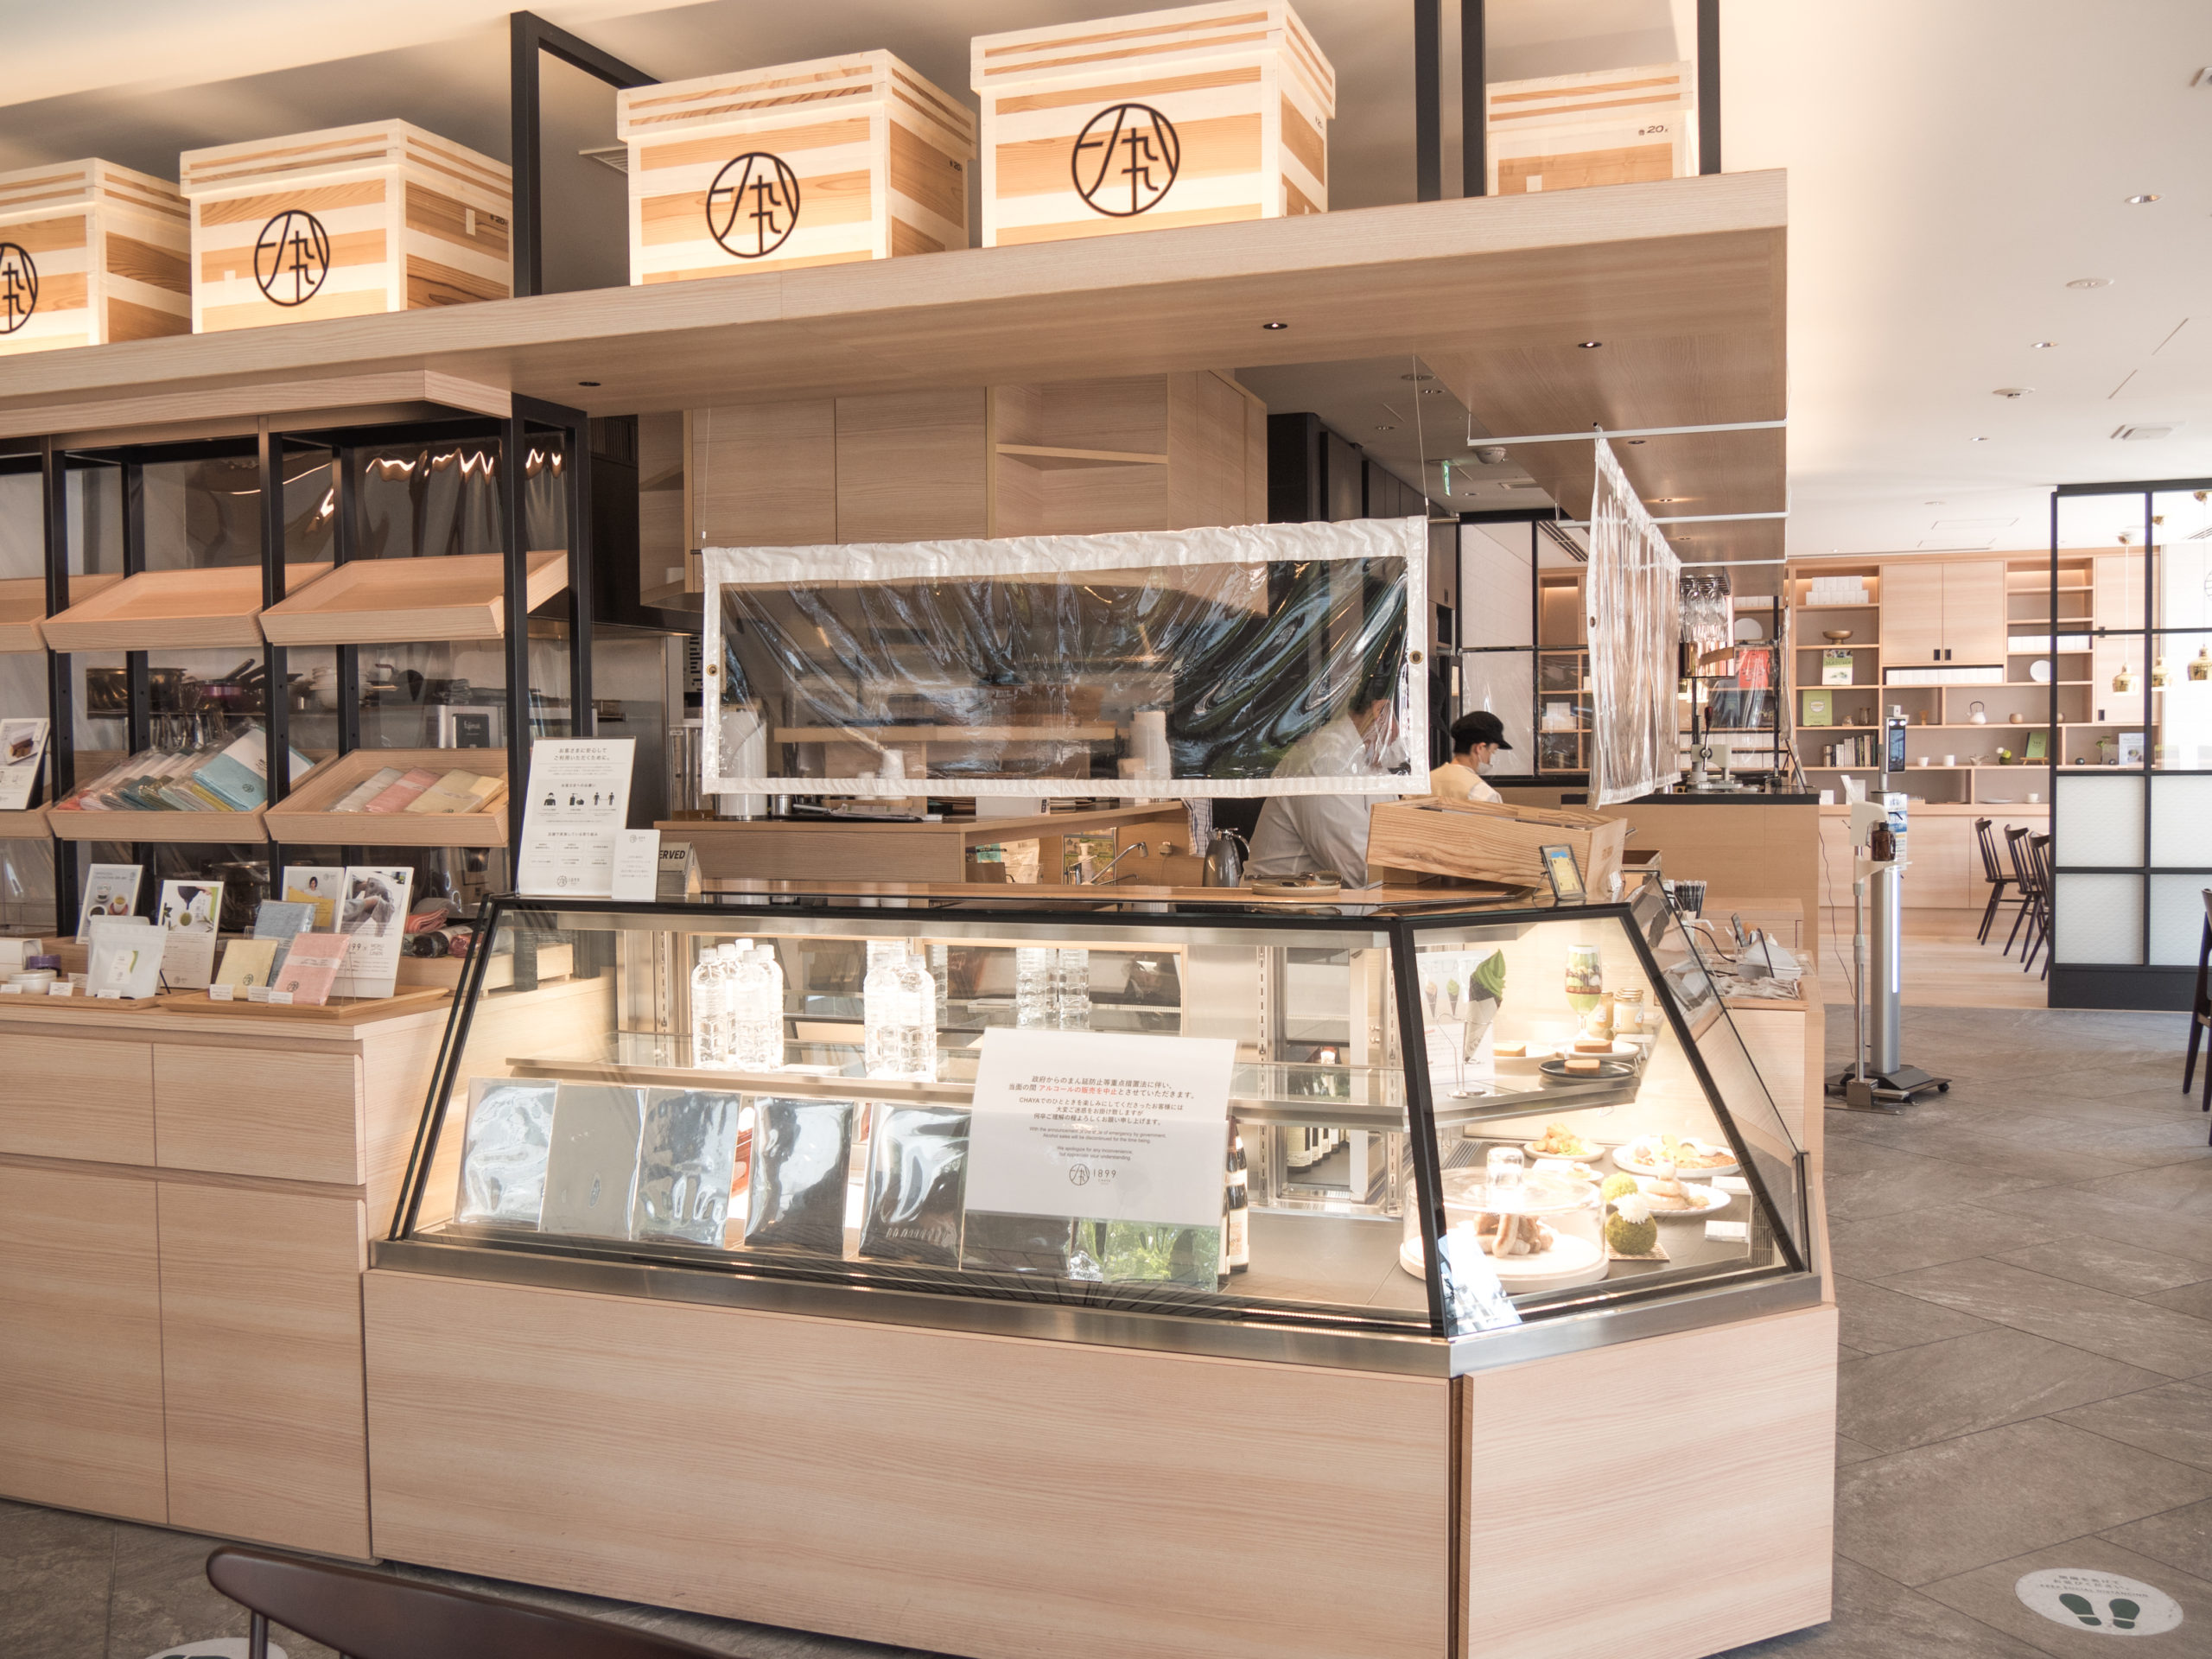 The boxes above the counter are also part of the tea-themed design, made to resemble those that are traditionally used for storing and transporting tea